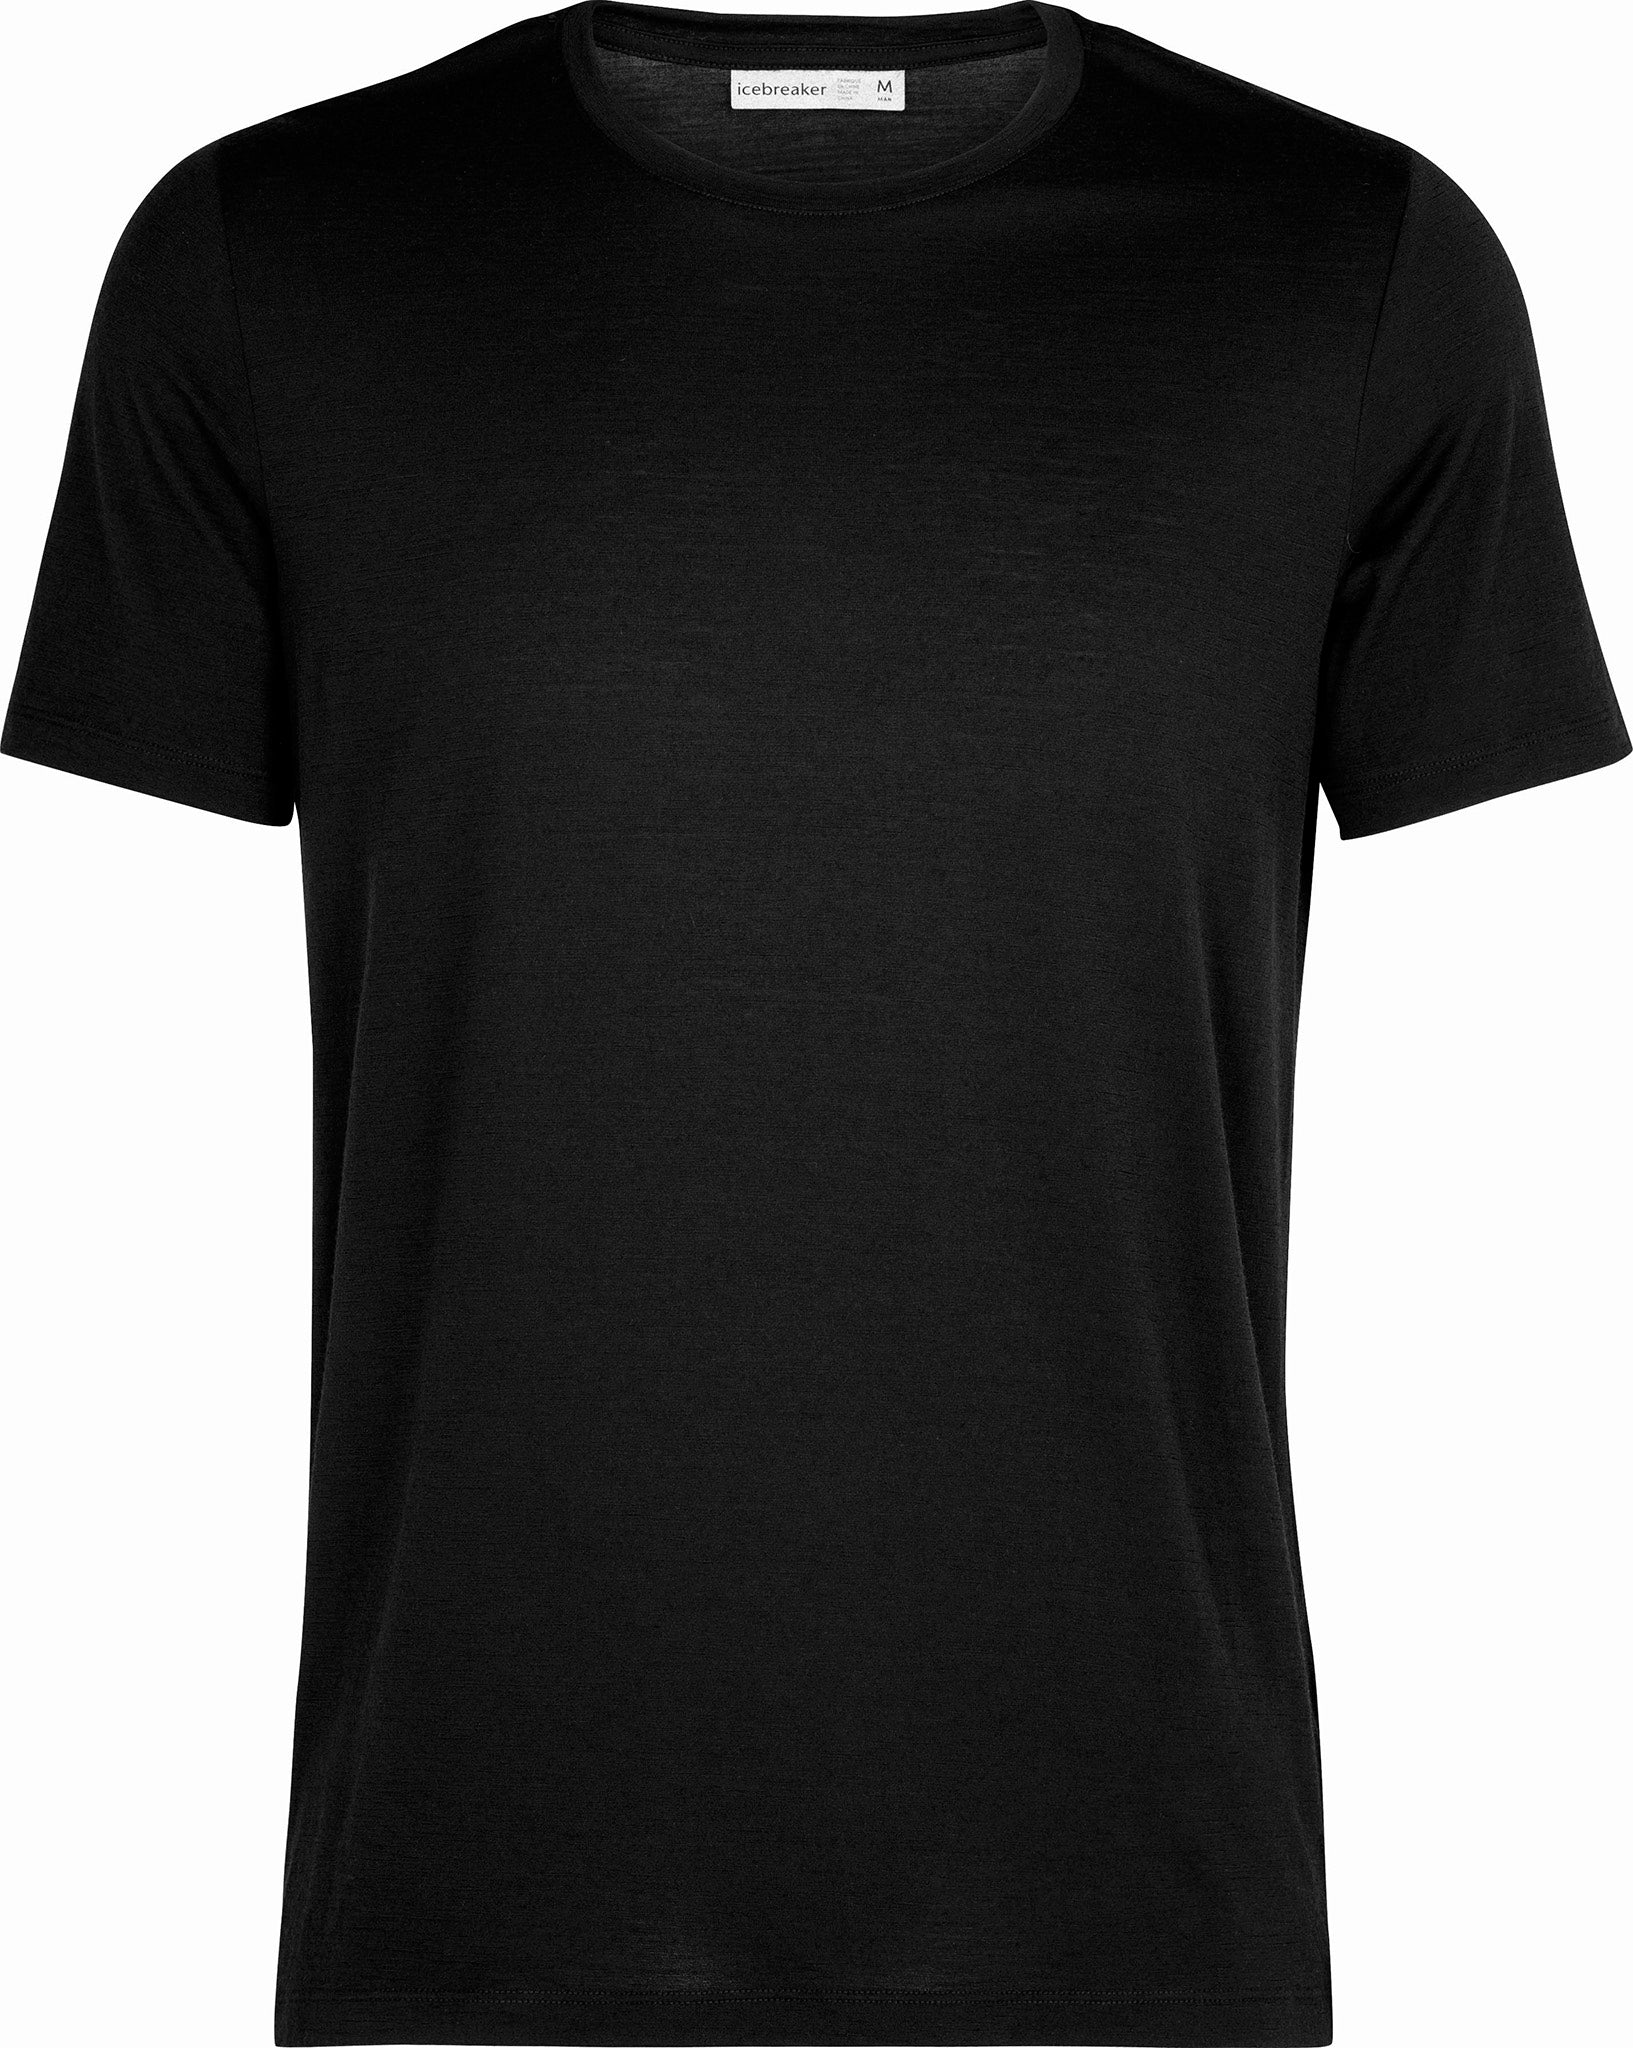 5 Pack: Women's Dry Fit Tech Stretch Short-Sleeve Crew Neck Athletic  T-Shirt (Available in Plus Size)